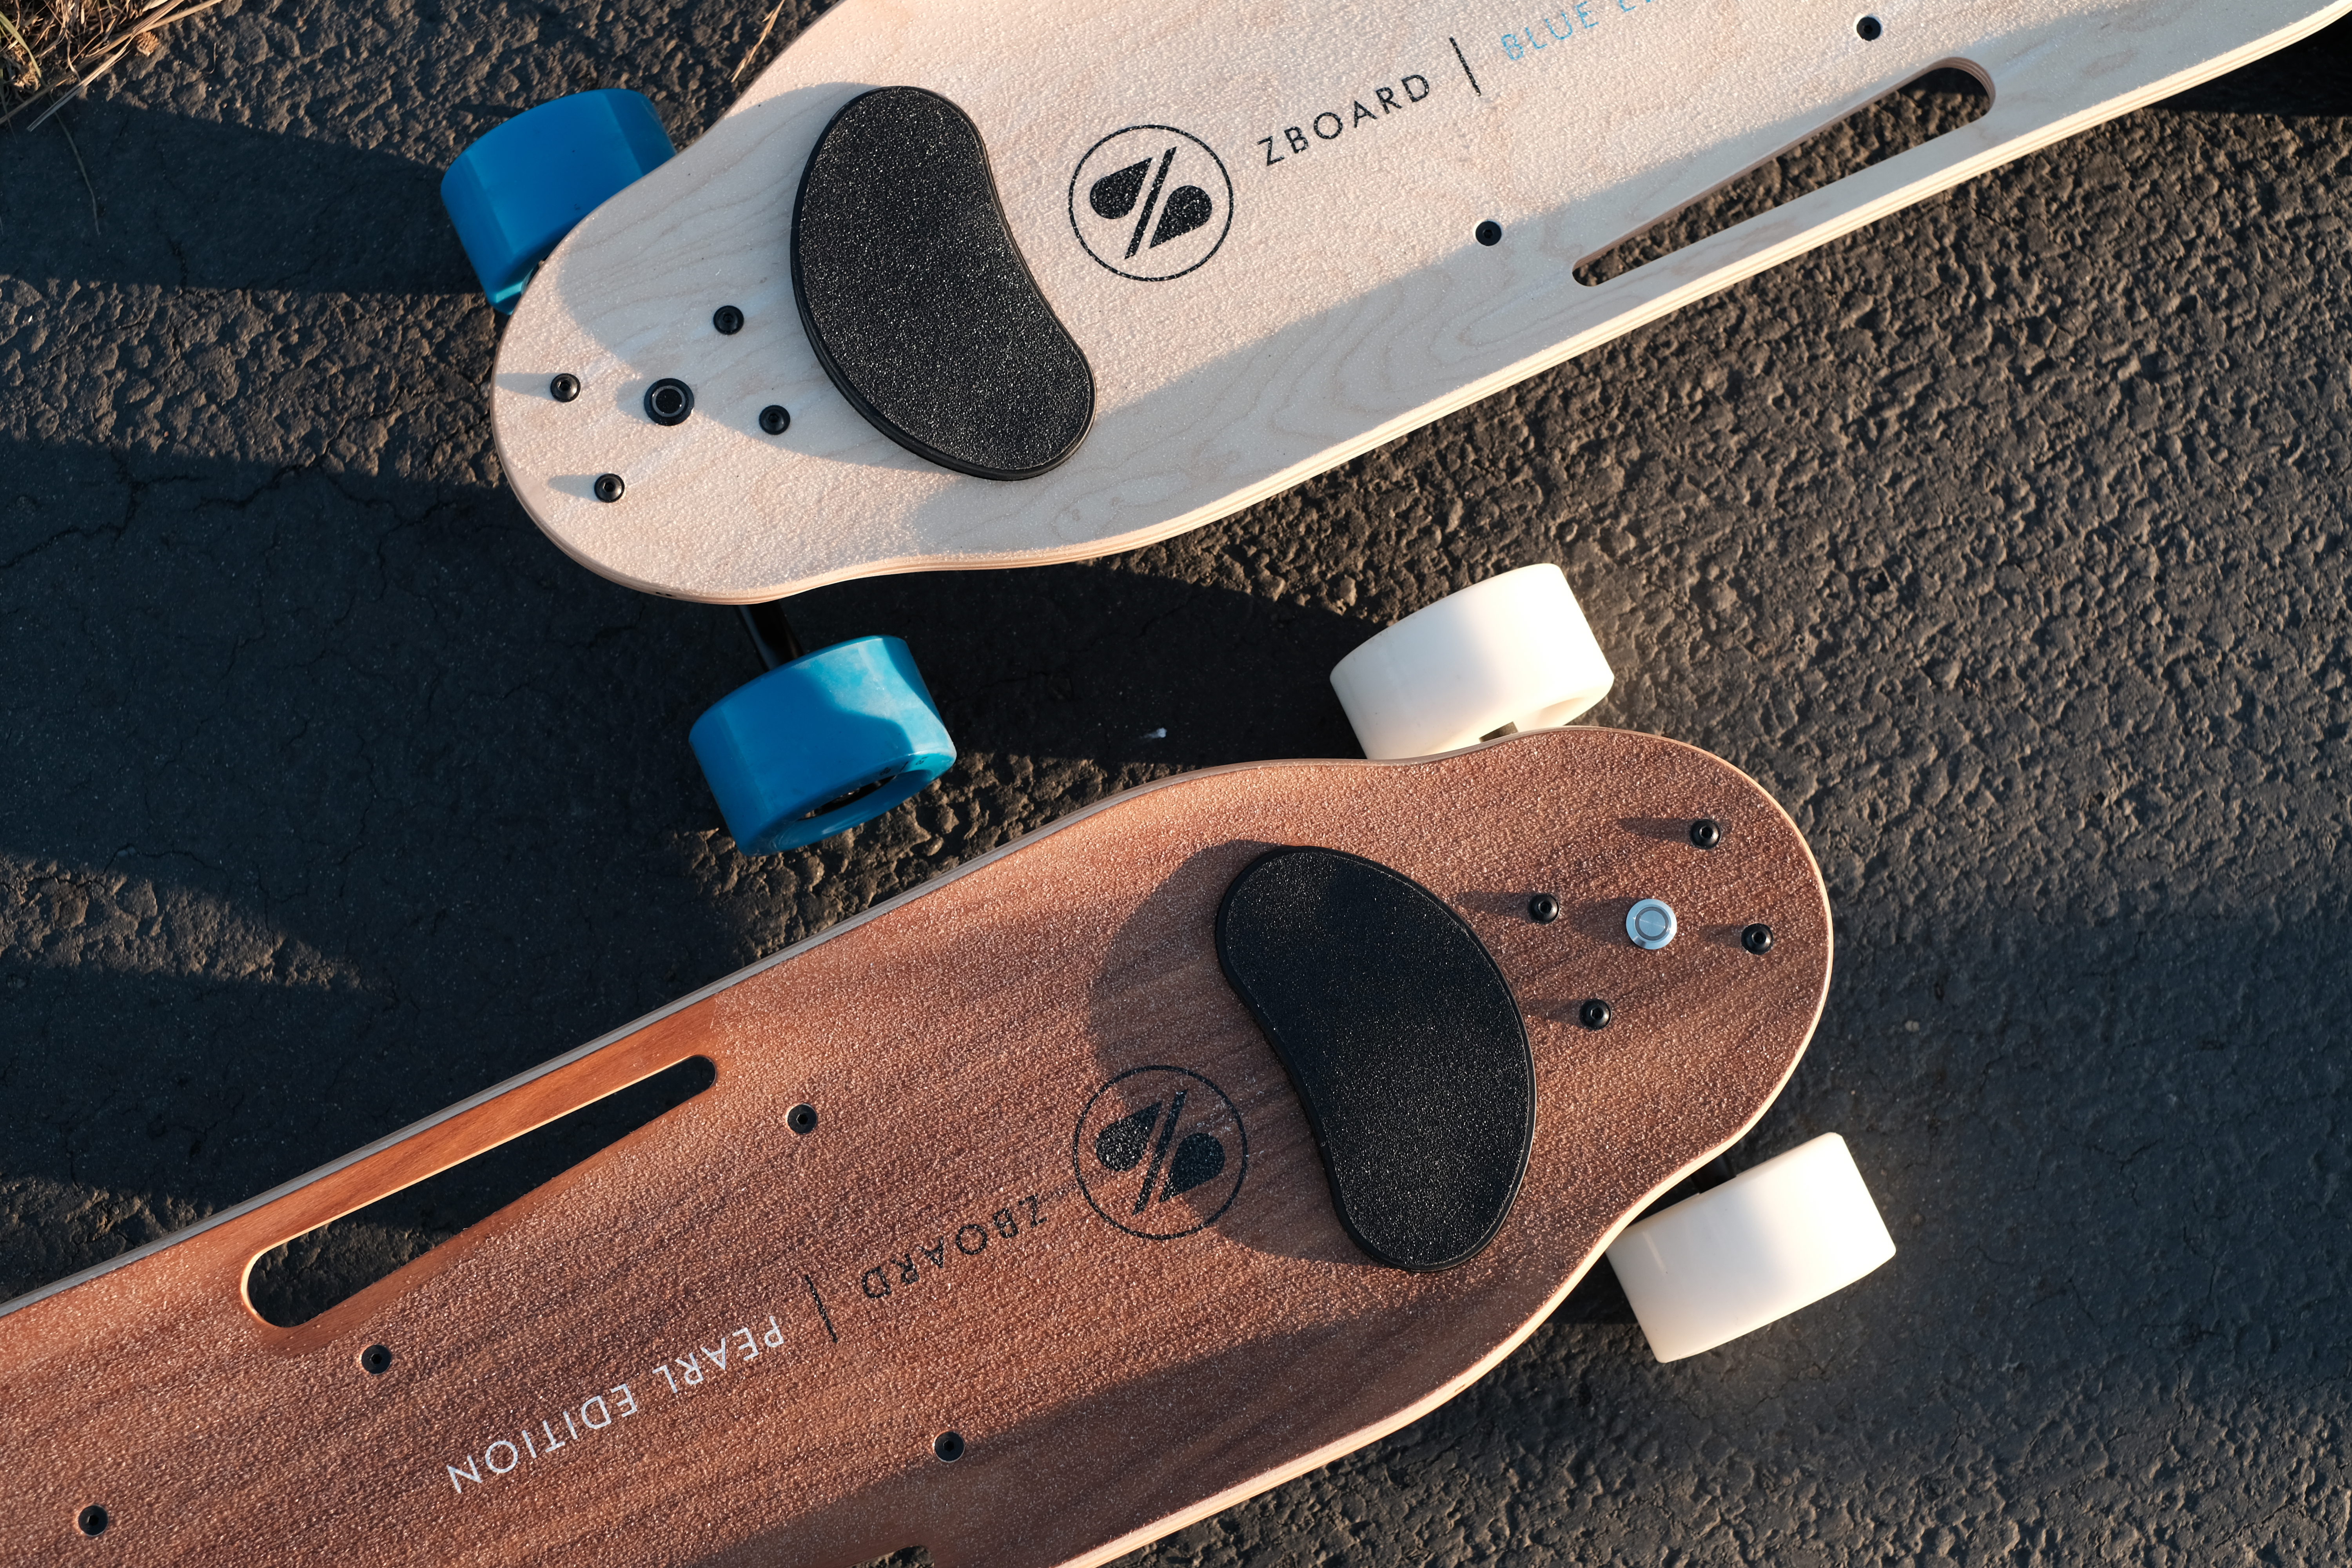 Zboard Is An Electric Skateboard That Doesn T Need A Controller